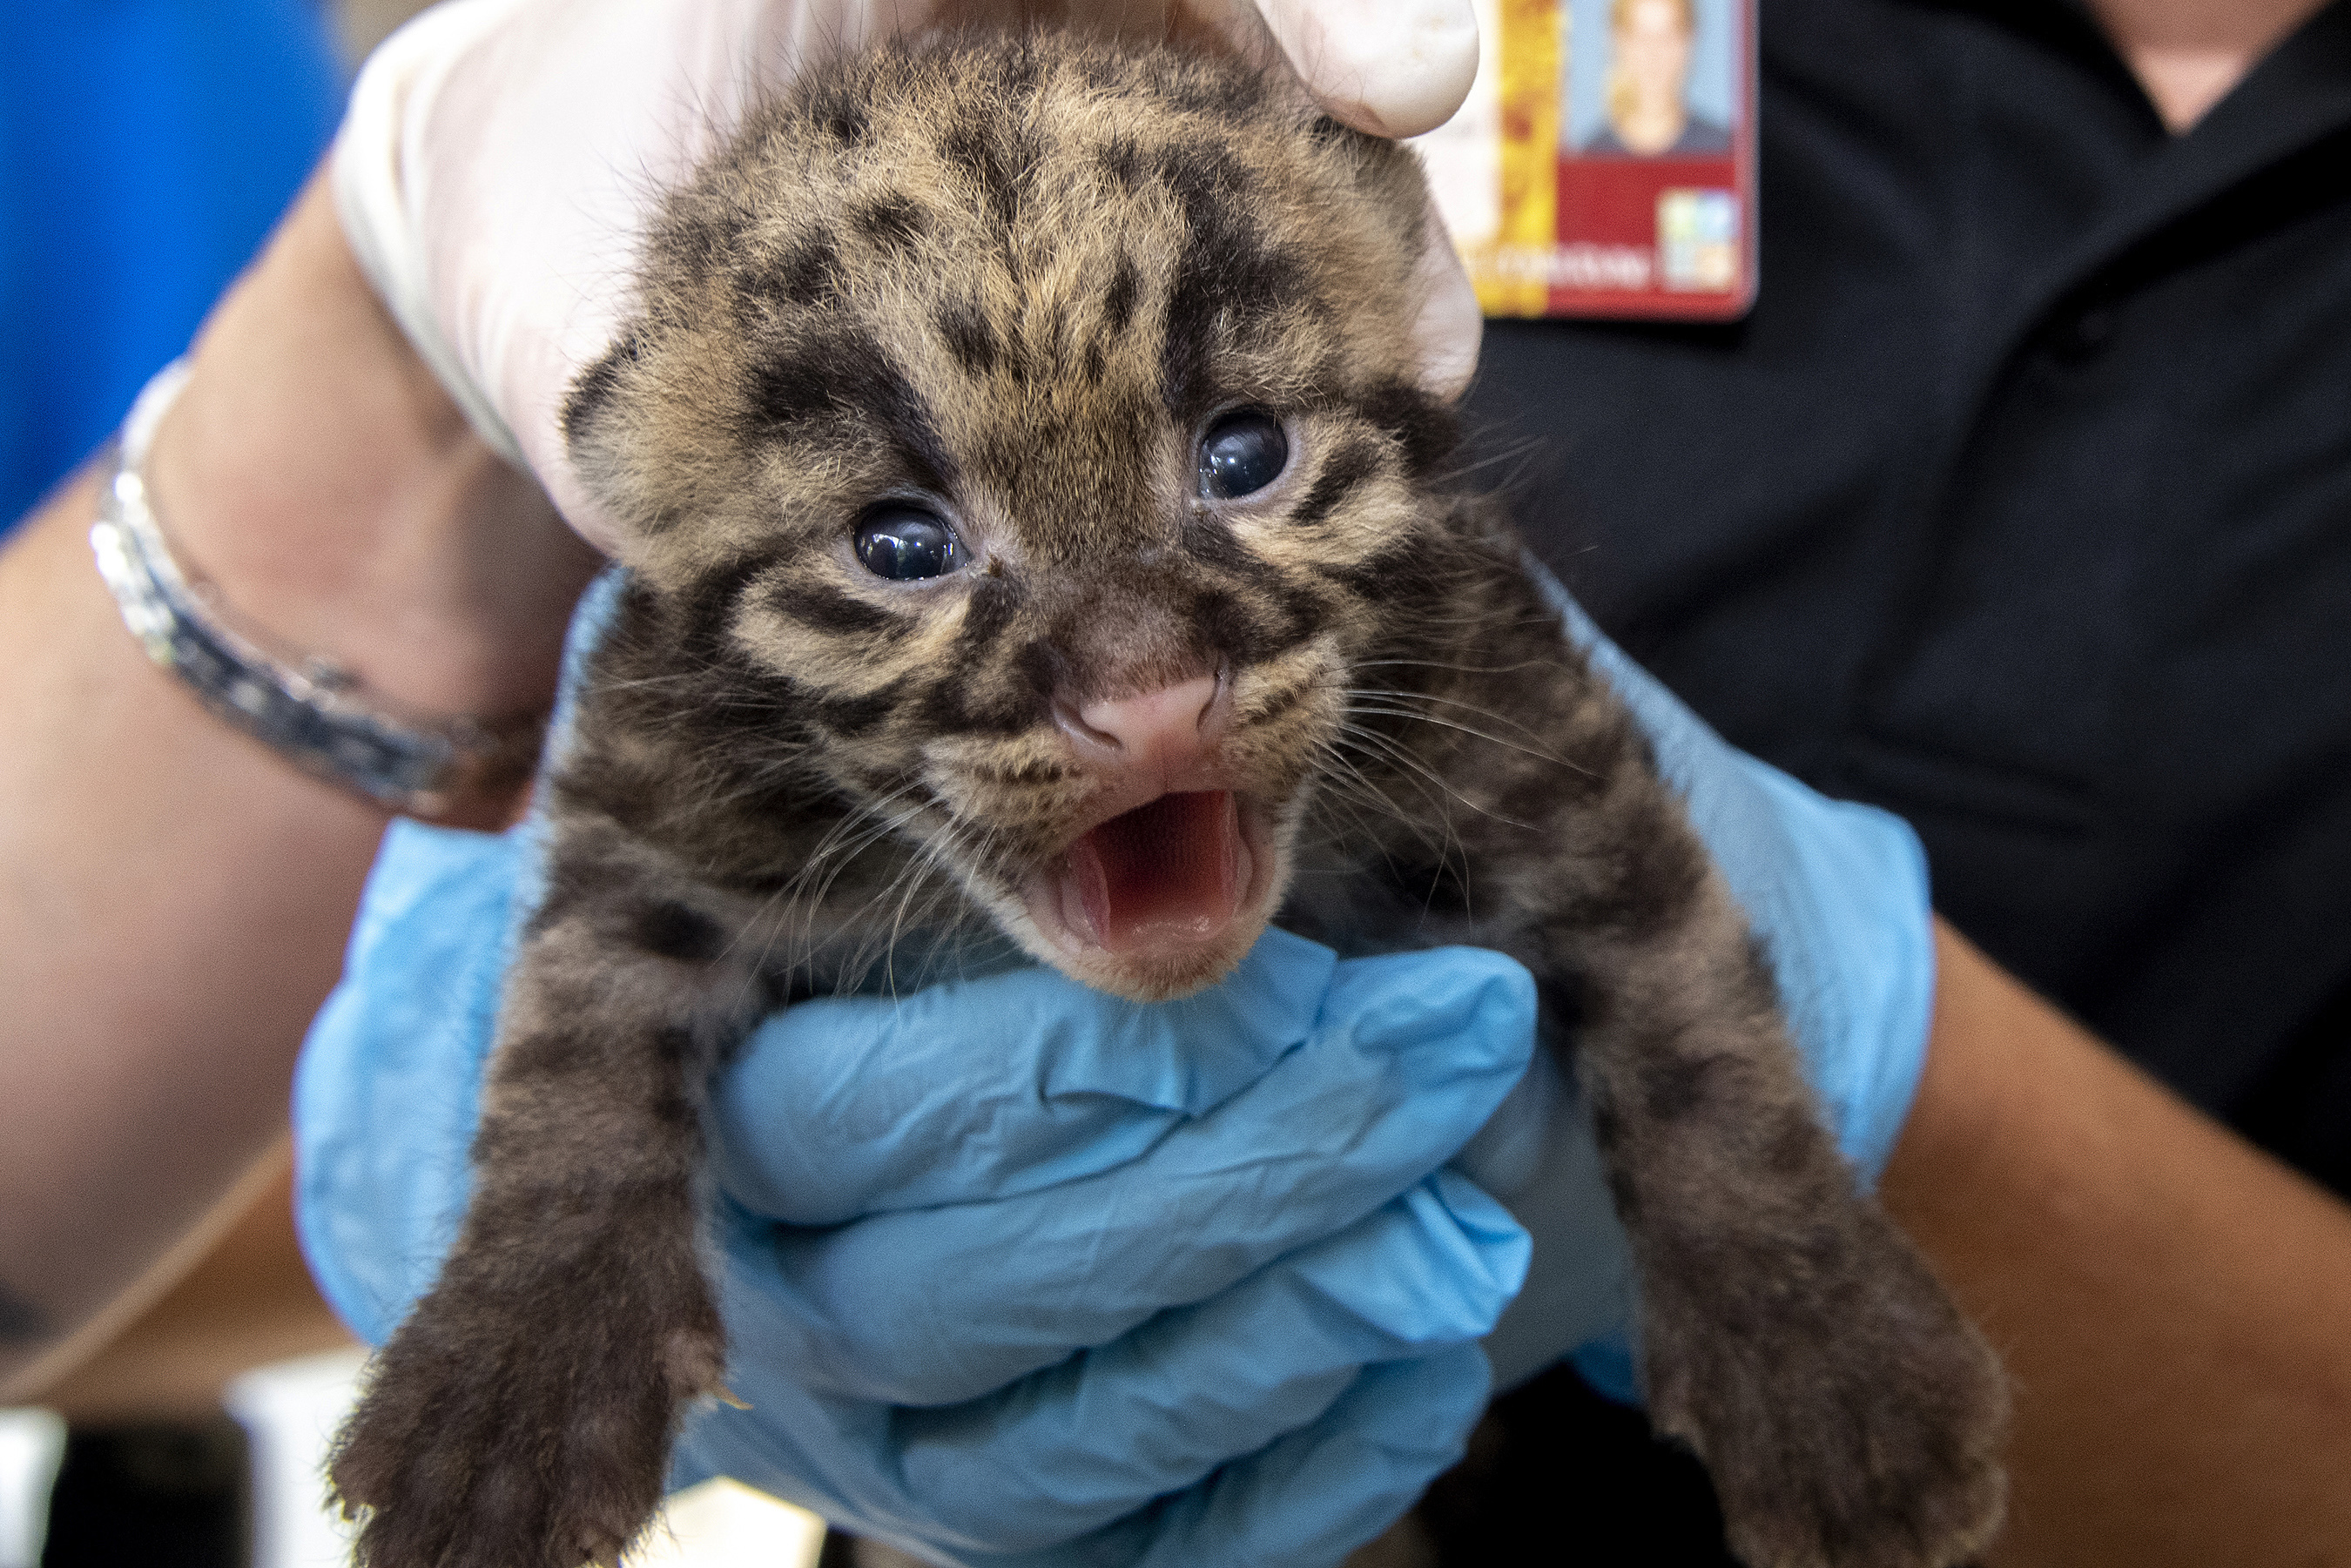  A newborn clouded leopard is held by a staff member for their neonatal exams at the zoo in Miami.